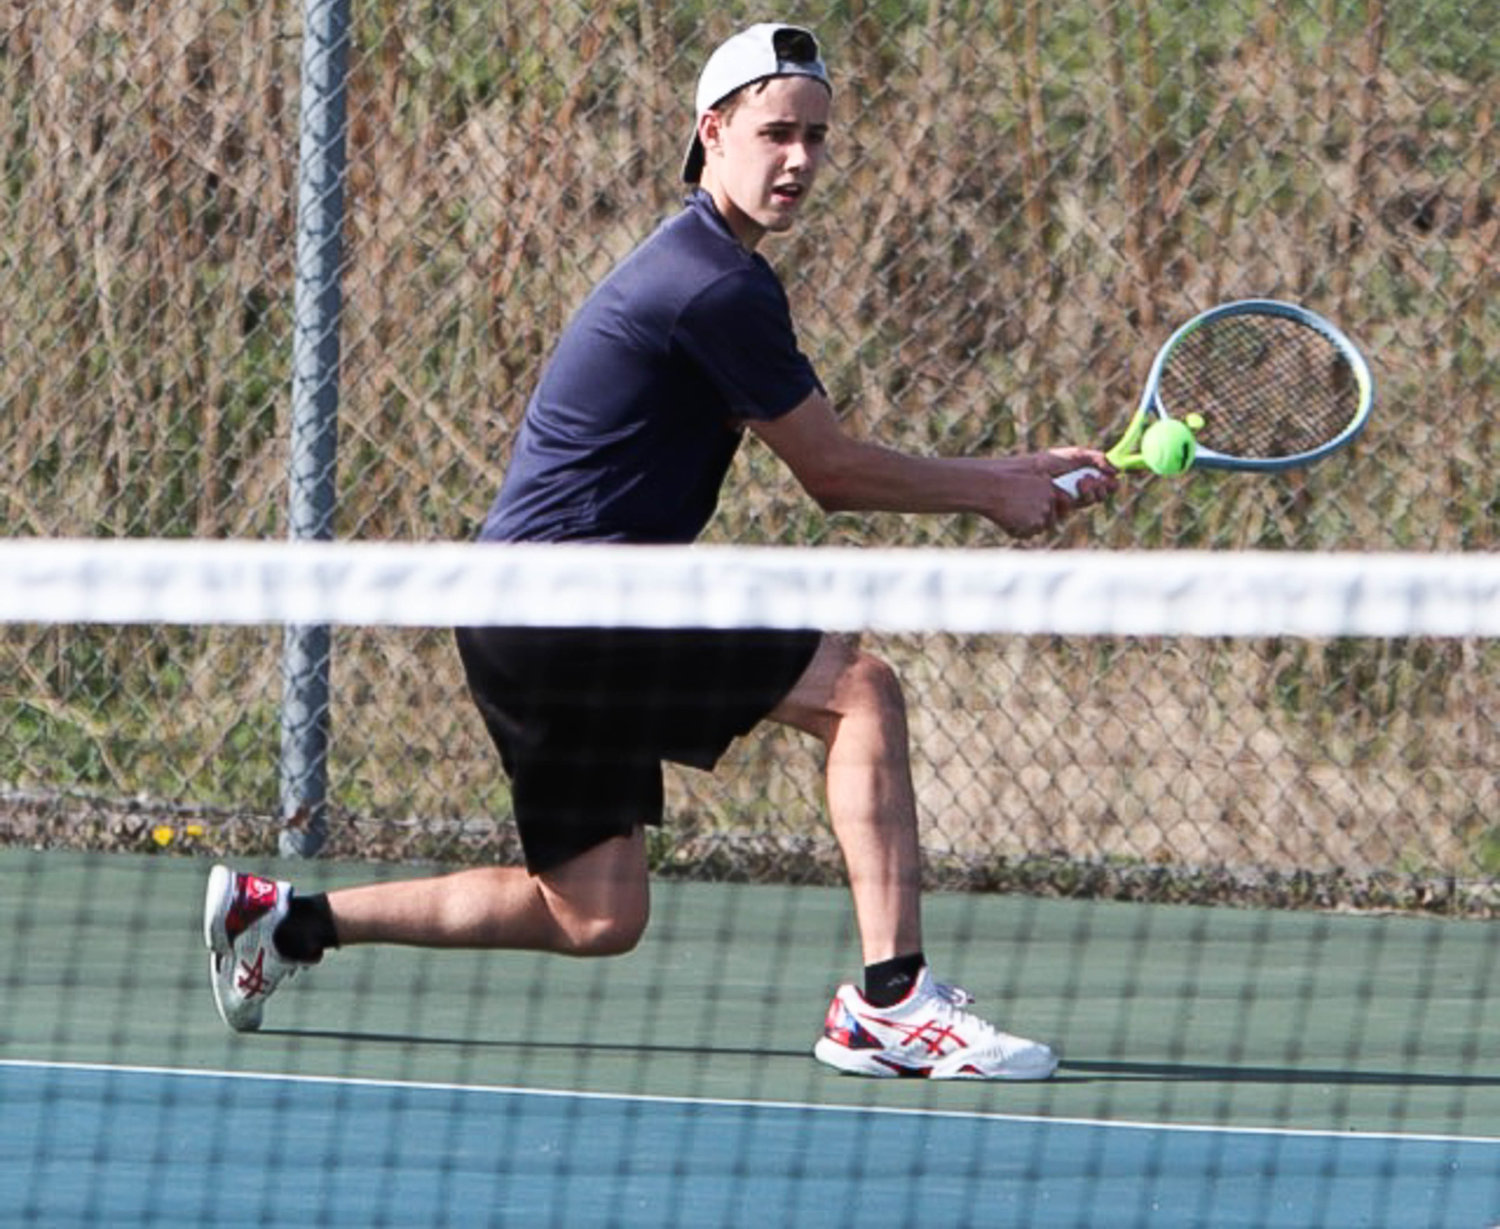 Oneida senior Seth O’Connell has been a team leader as the primary first singles player for the team. Though he lost in the semifinals of the Section III Class B first singles tournament Wednesday, he got far enough to earn a spot in the state qualifier tournament.